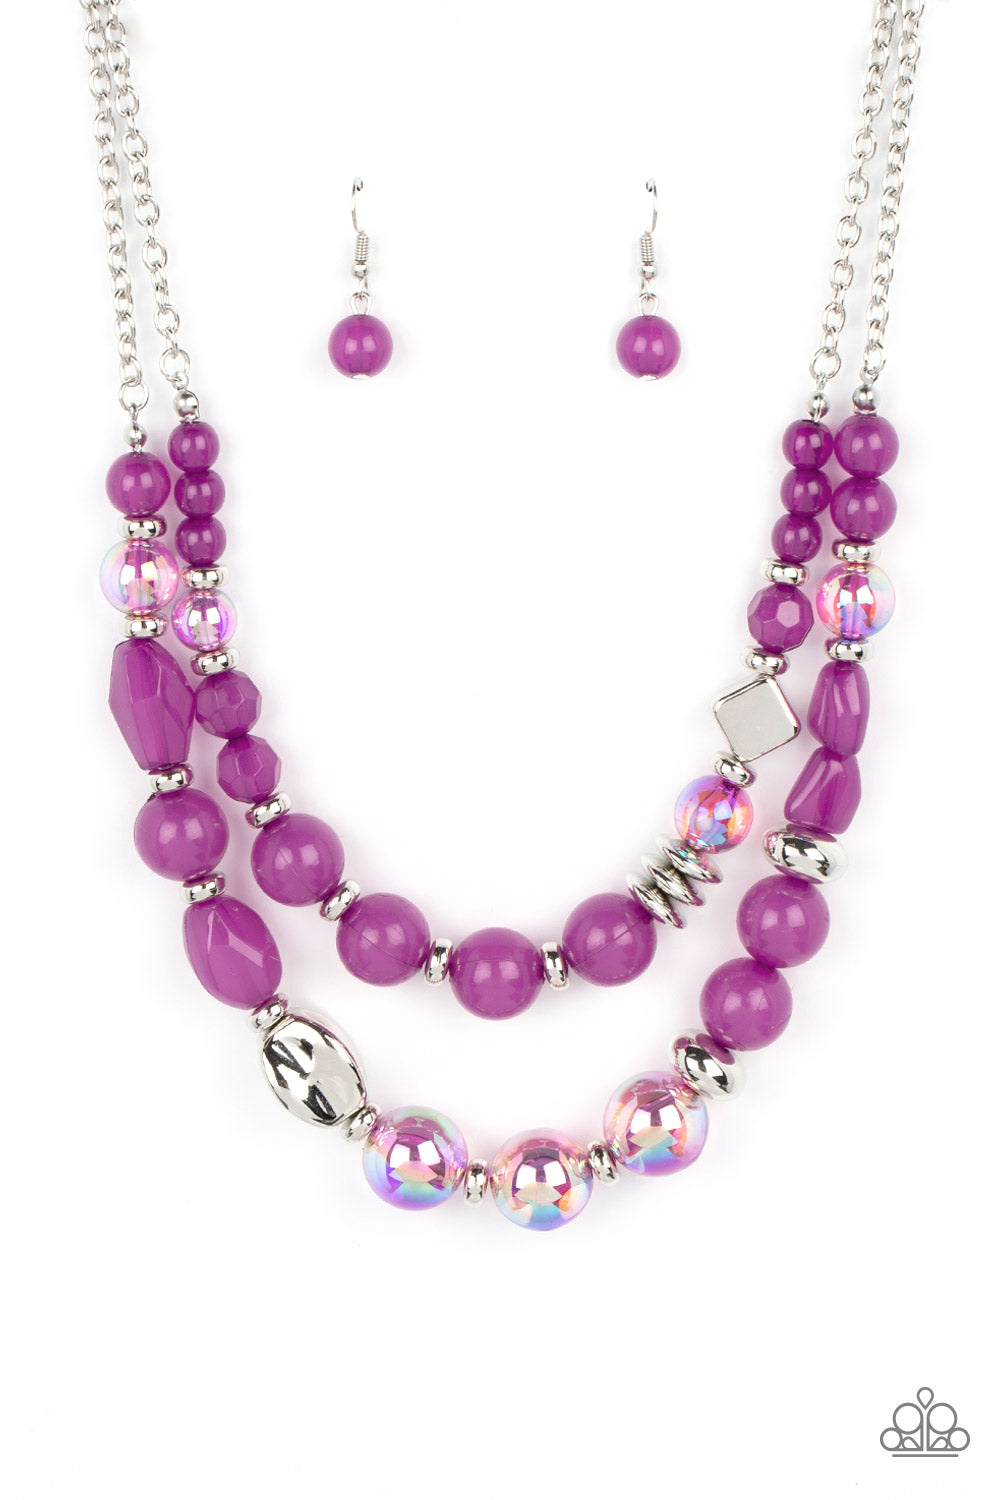 Paparazzi Accessories Mere Magic - Purple Featuring various shapes and finishes, a mismatched assortment of silver, iridescent, and opaque Dahlia beads have been threaded along invisible wires below the collar, creating ethereal layers. Features an adjust